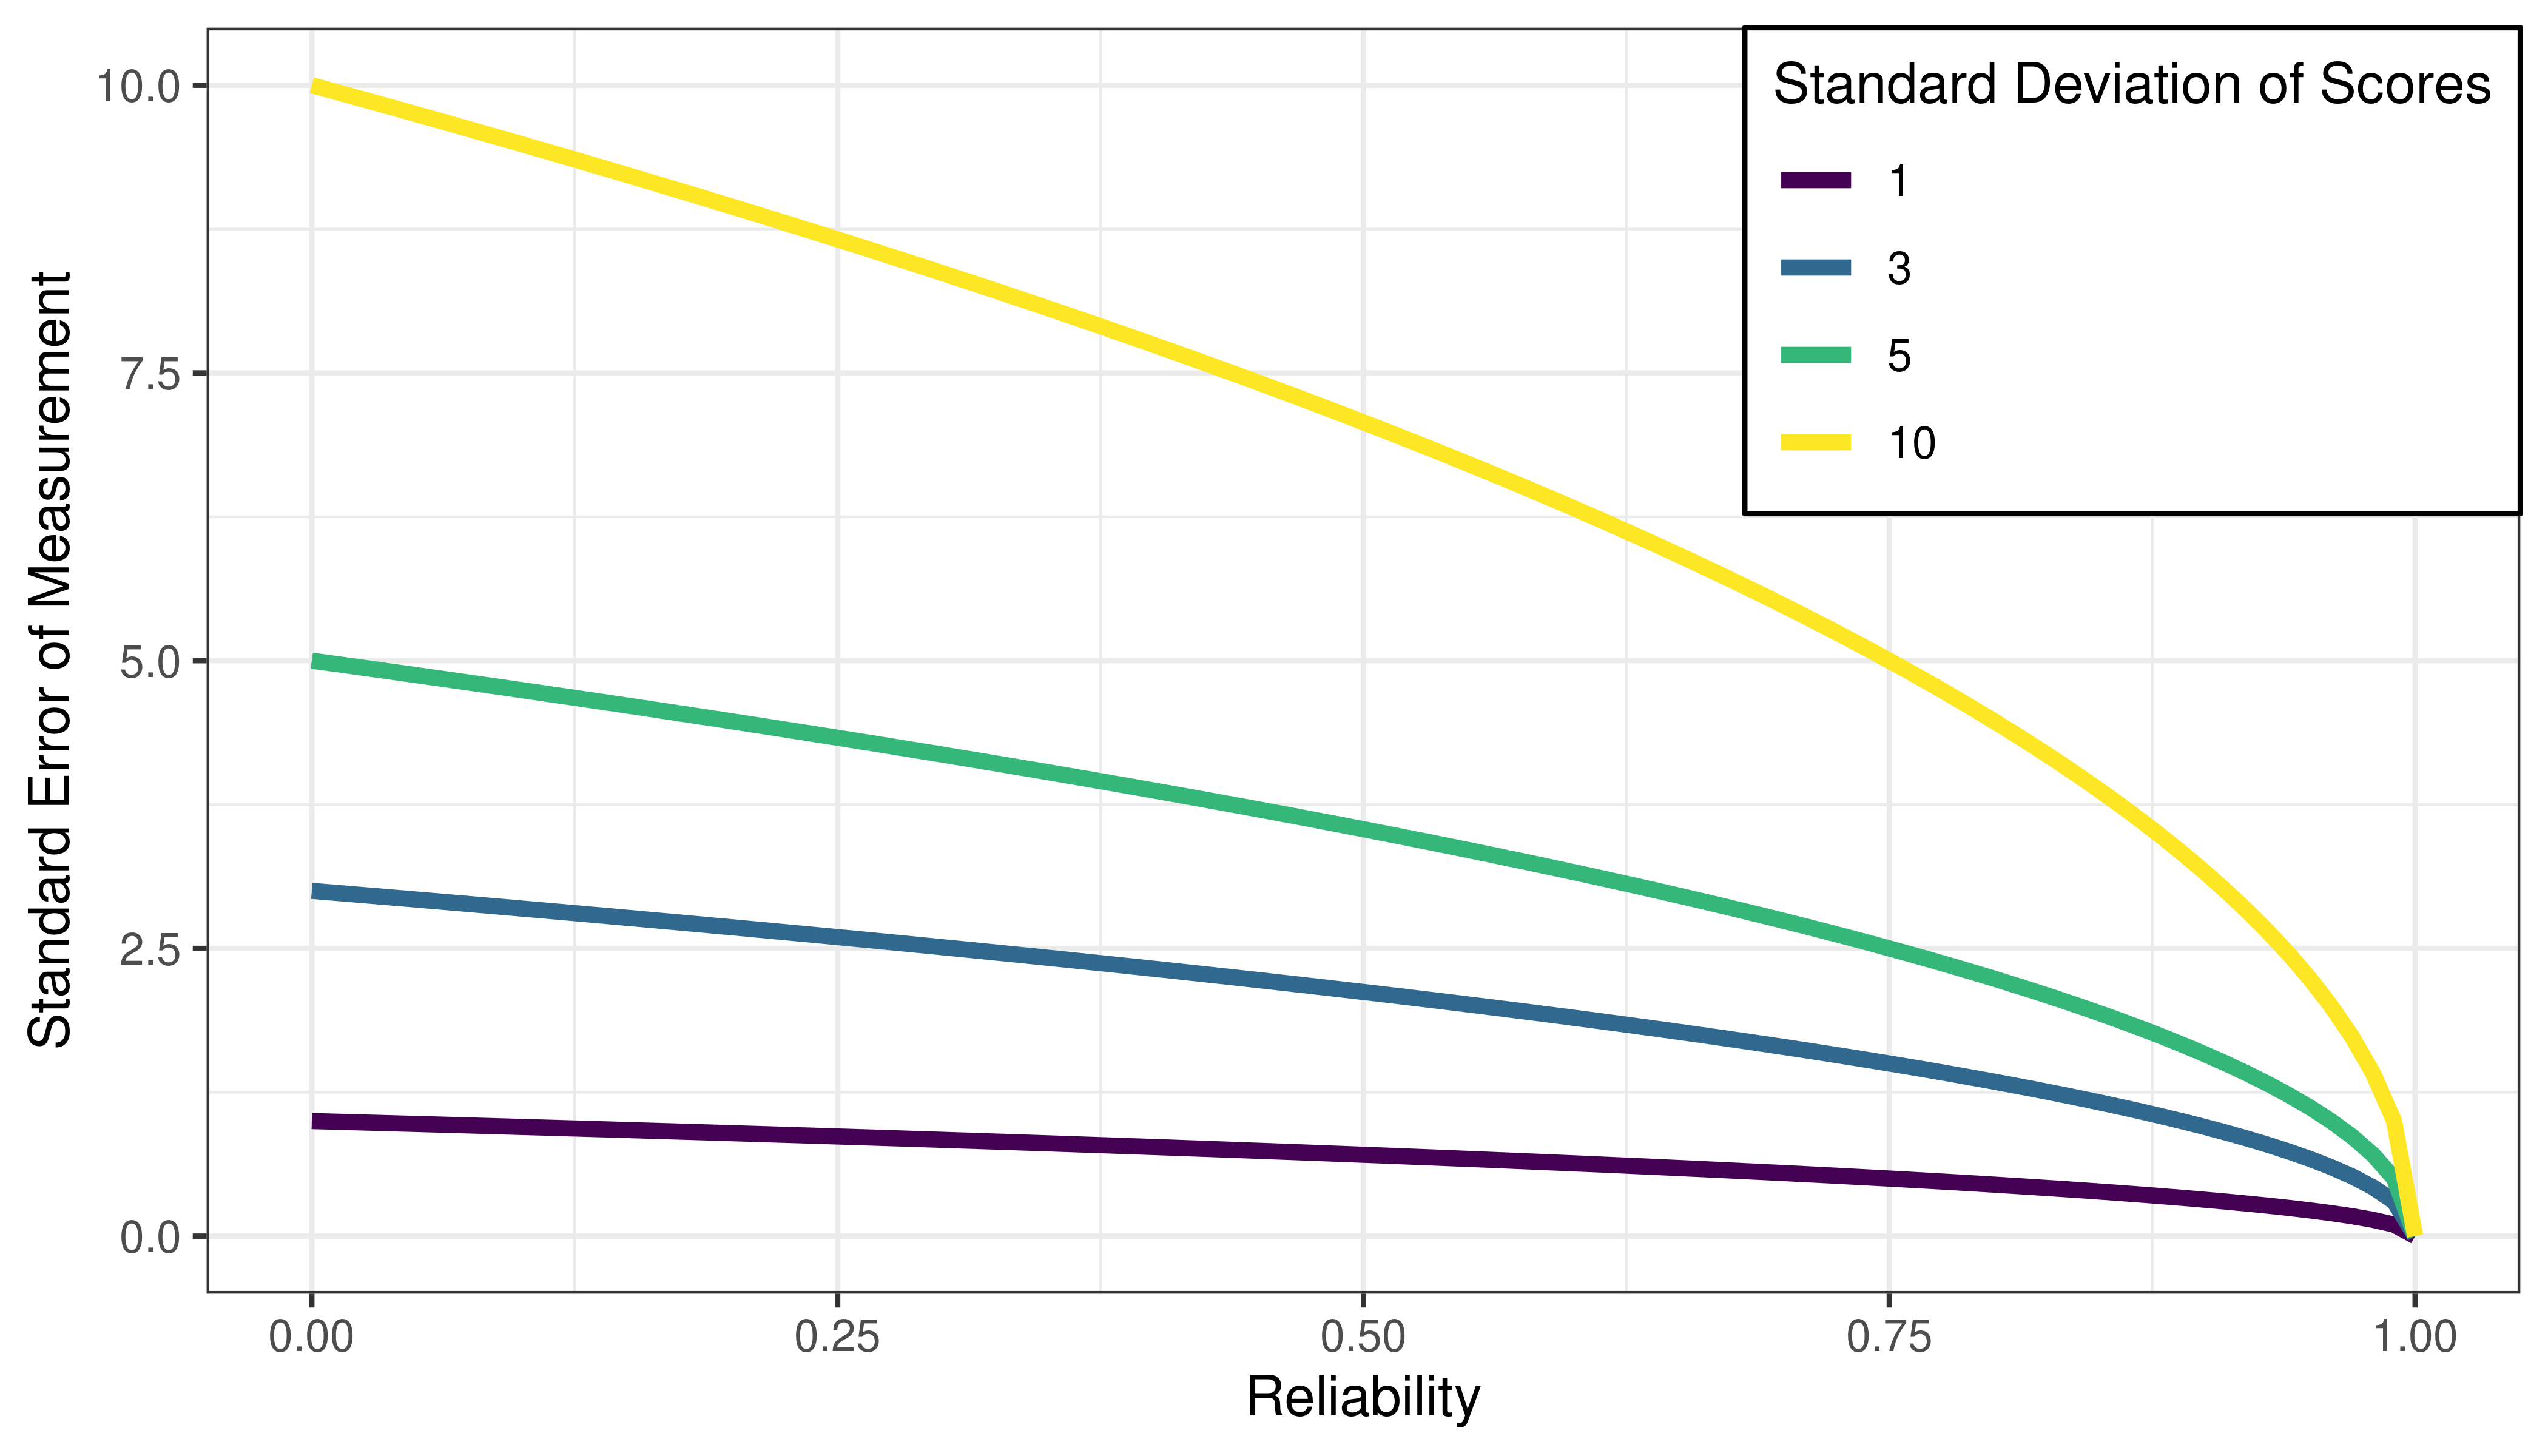 Standard Error of Measurement as a Function of Reliability.